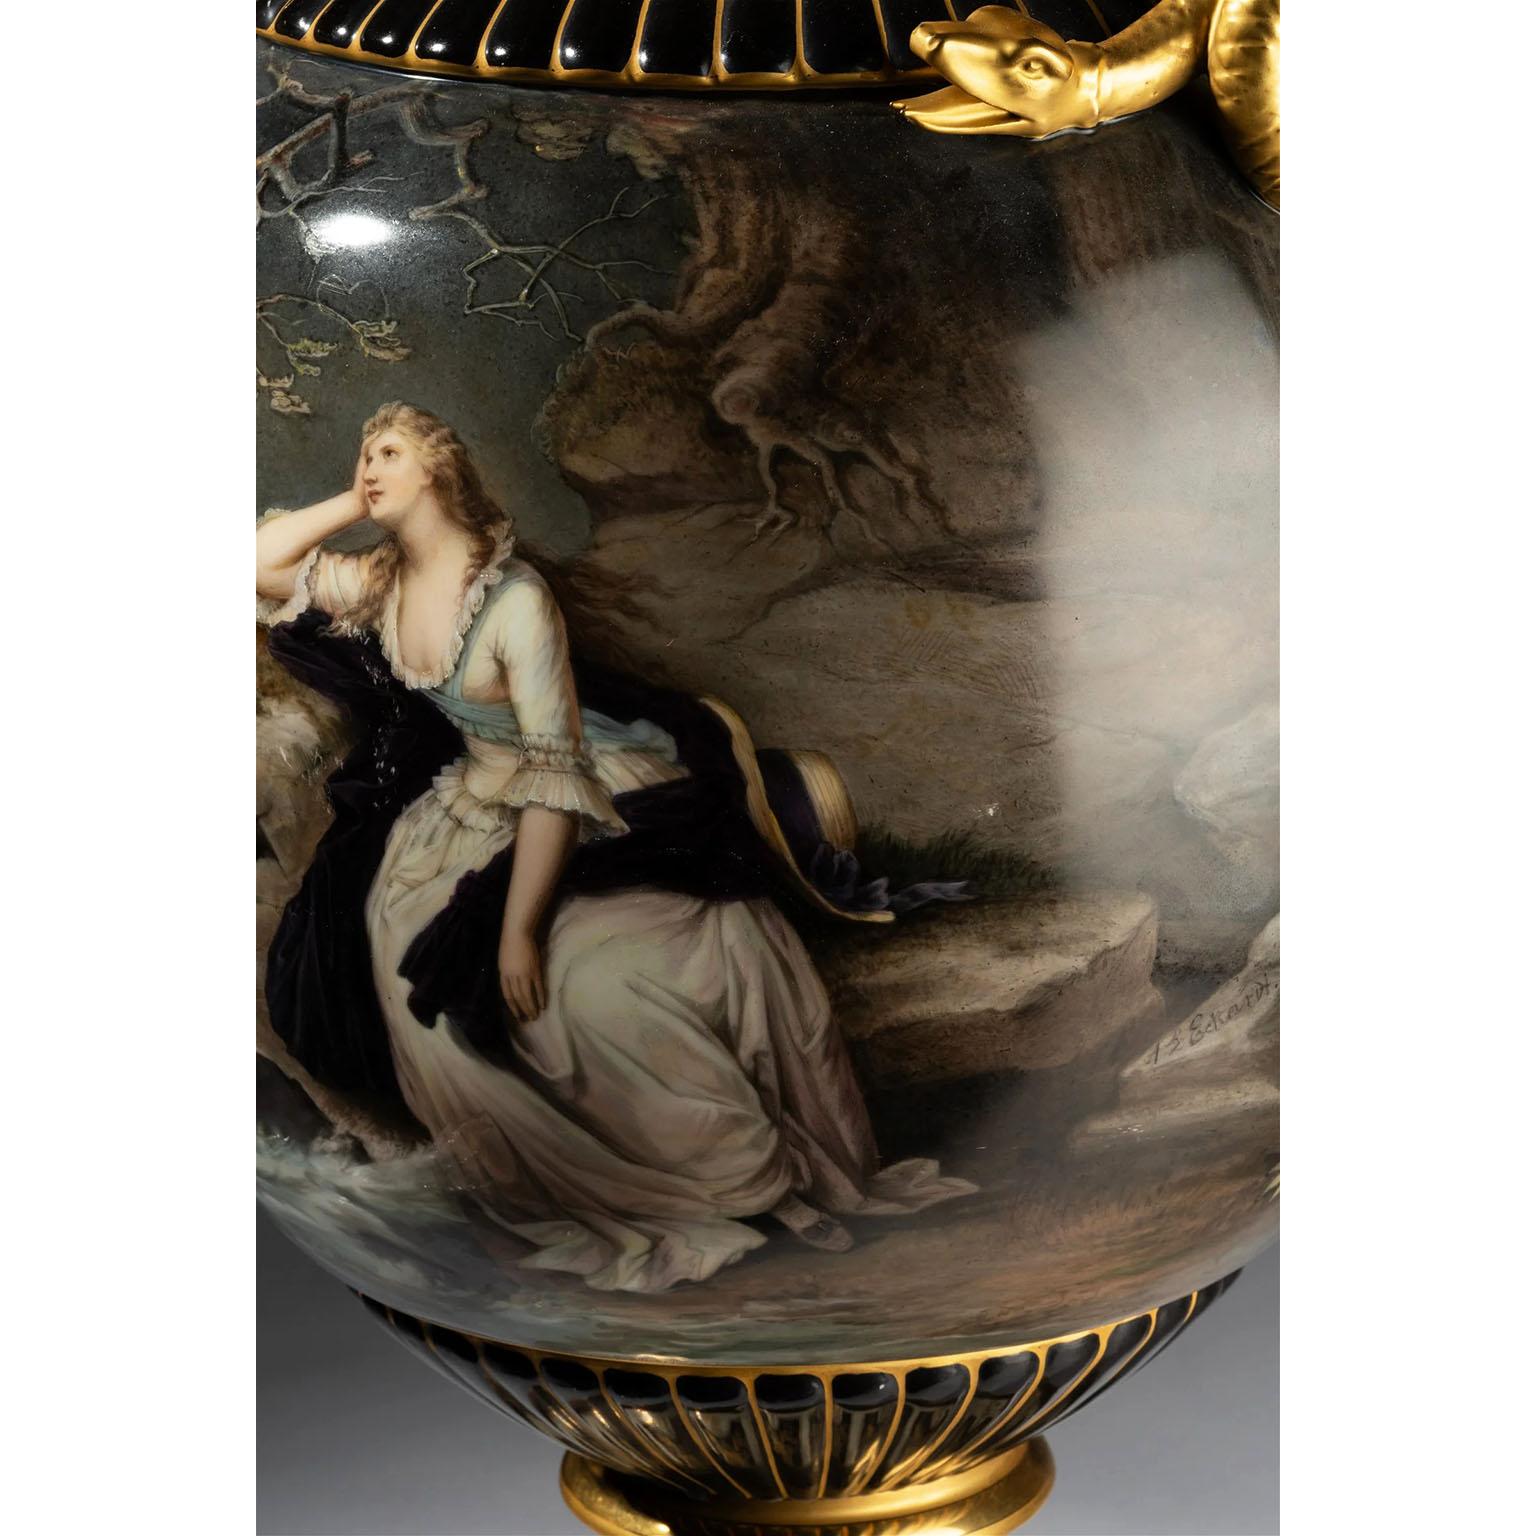 Fine 19th Century Vienna-Style Porcelain Vase 'Search for Love' by Pirkenhammer  In Good Condition For Sale In Los Angeles, CA